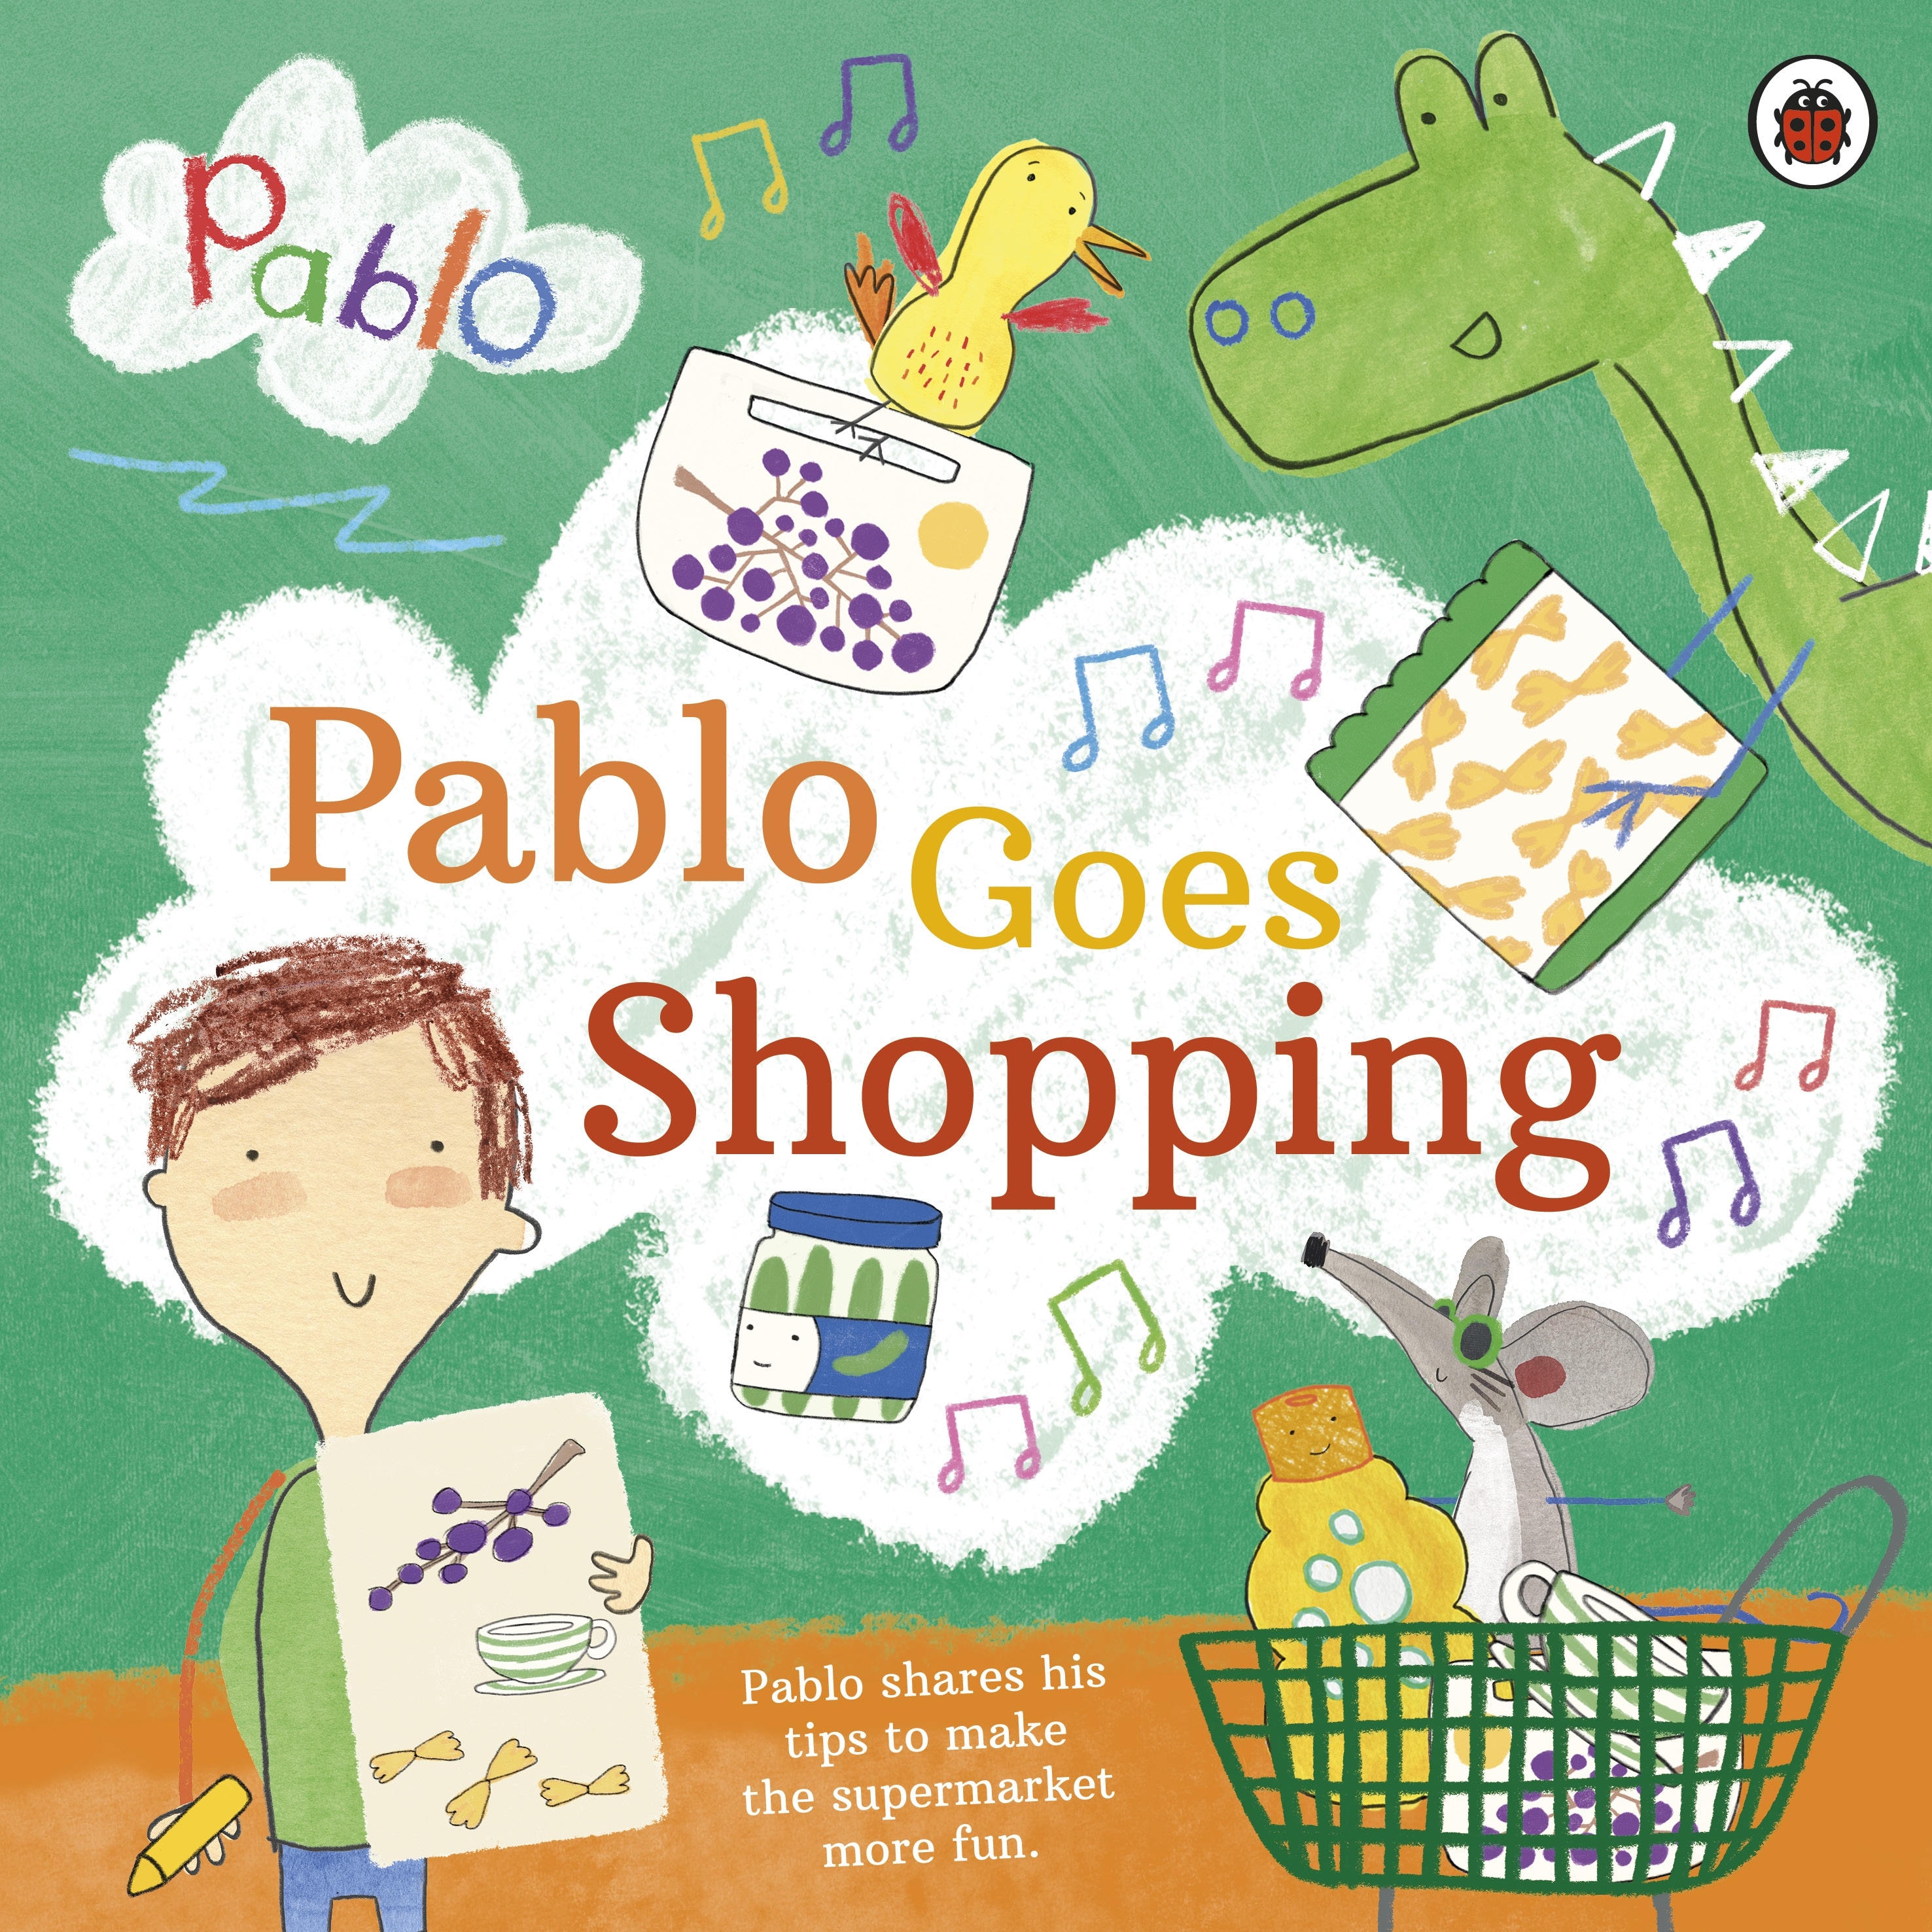 Book “Pablo: Pablo Goes Shopping” by Pablo — March 4, 2021